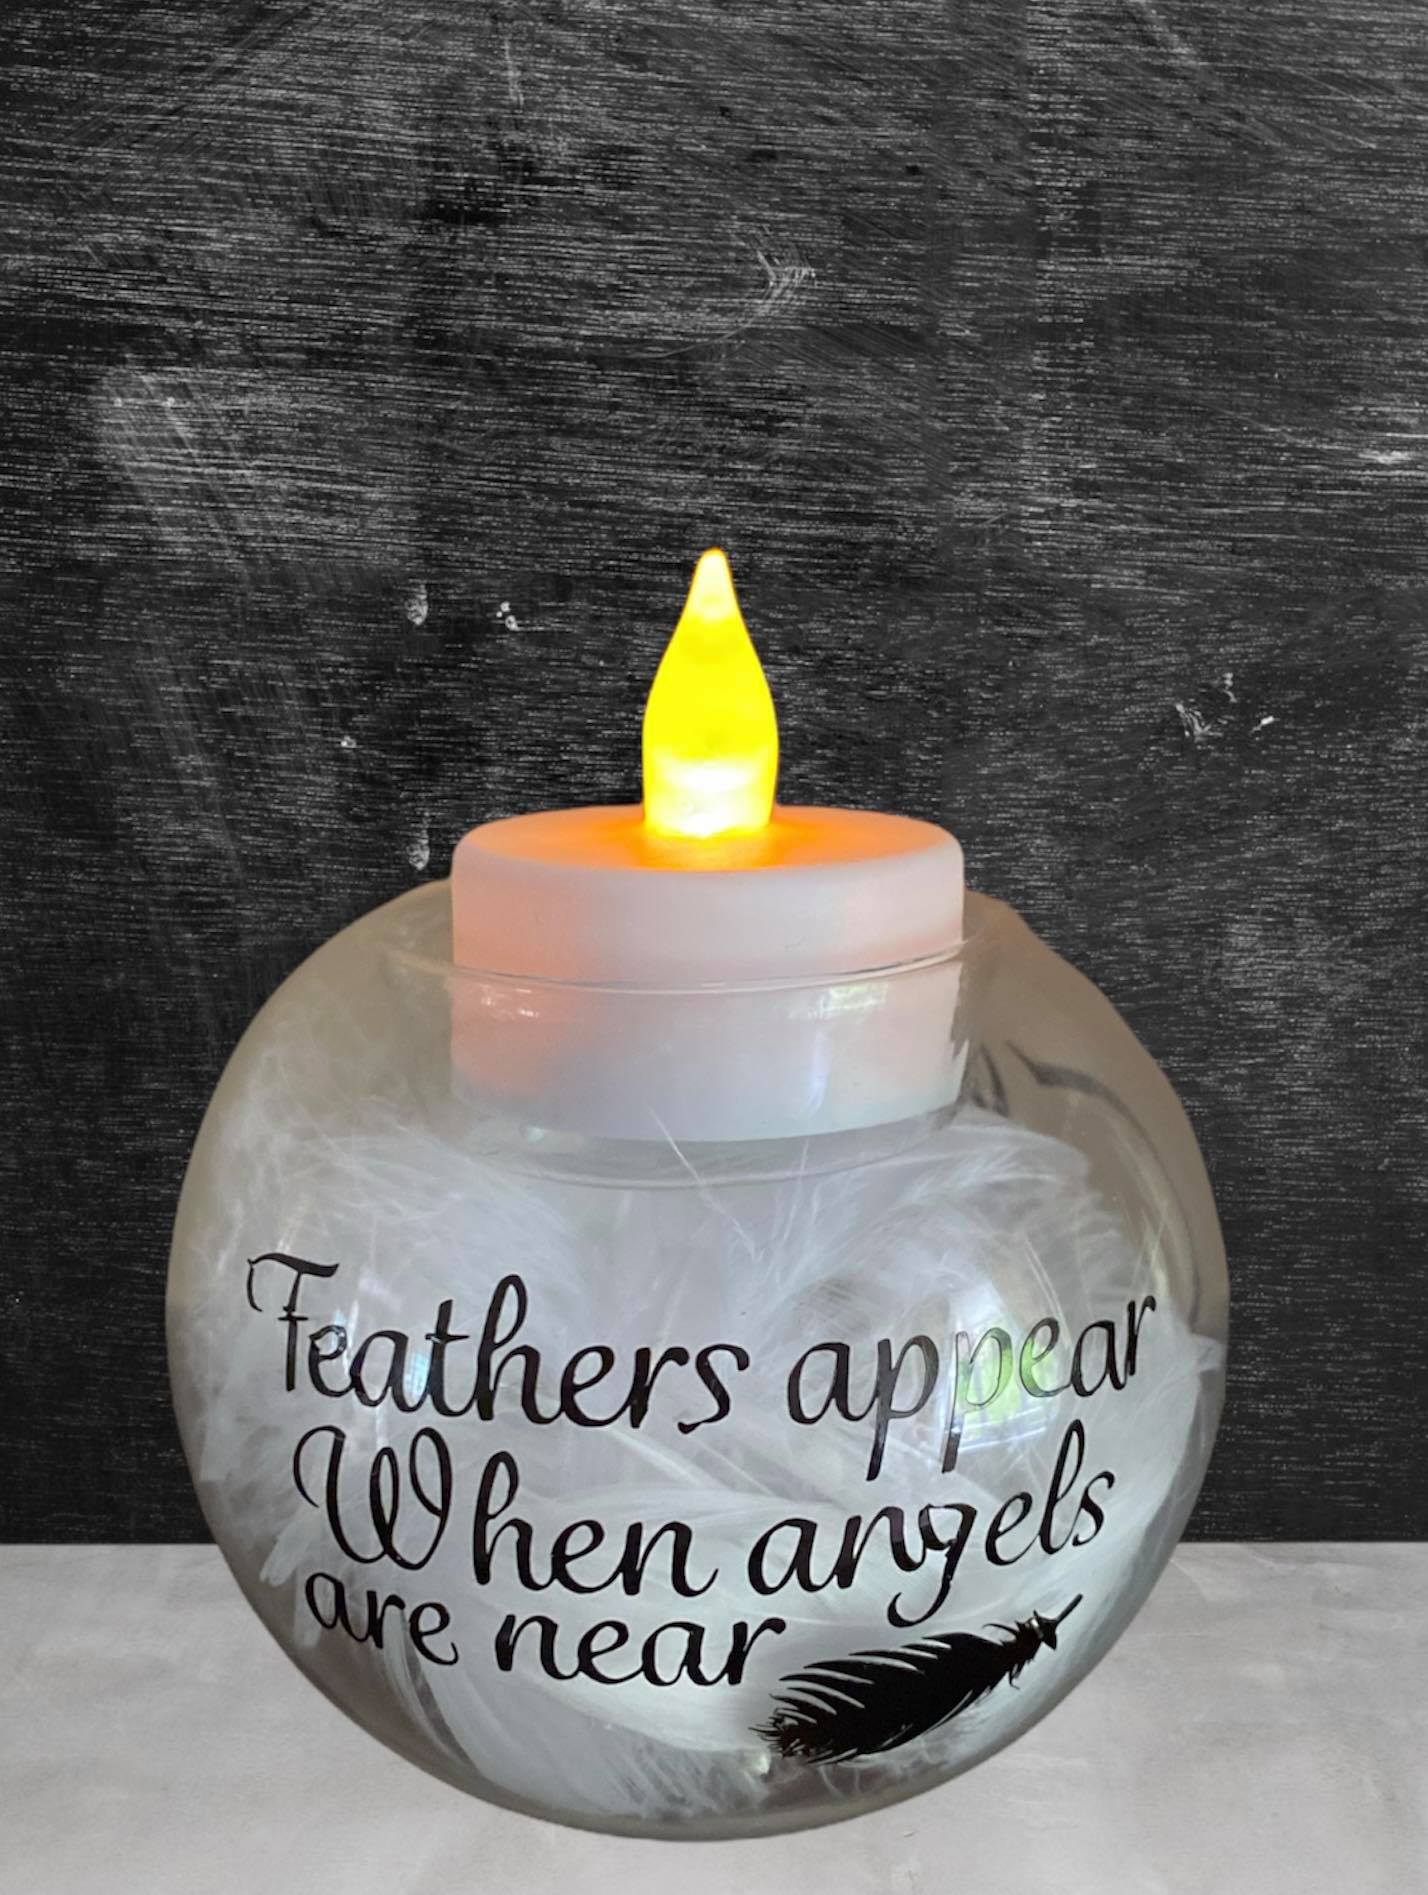 "Feathers appear when angles are near" Tealight Holder